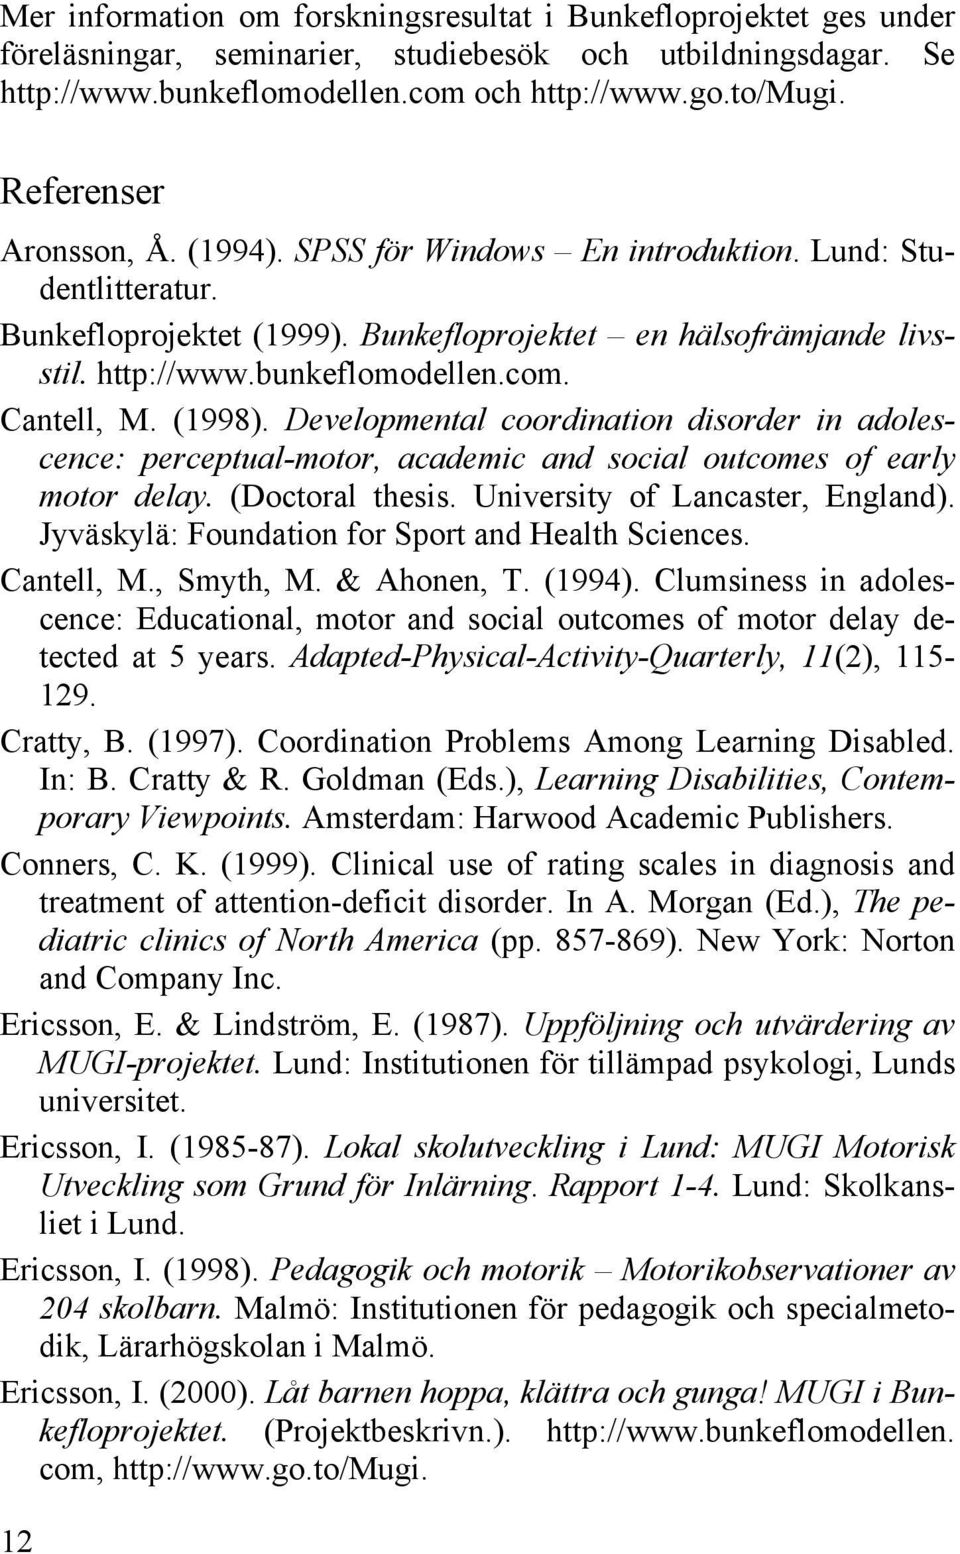 Cantell, M. (1998). Developmental coordination disorder in adolescence: perceptual-motor, academic and social outcomes of early motor delay. (Doctoral thesis. University of Lancaster, England).